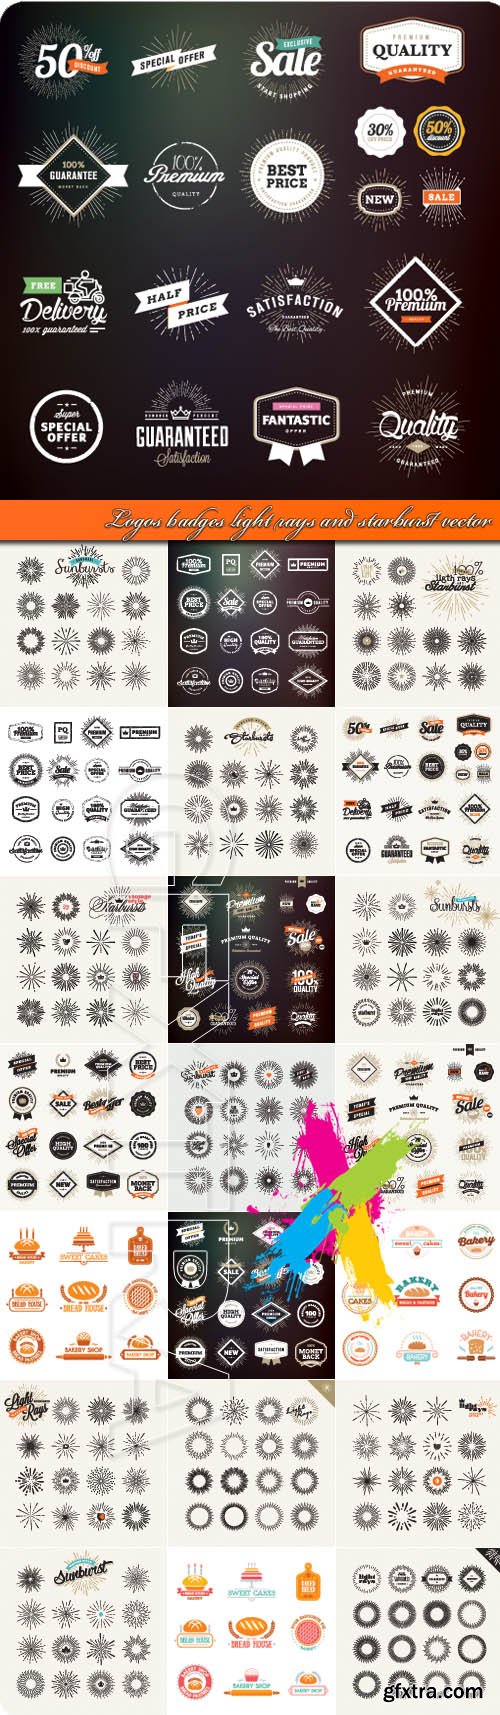 Logos badges light rays and starburst vector